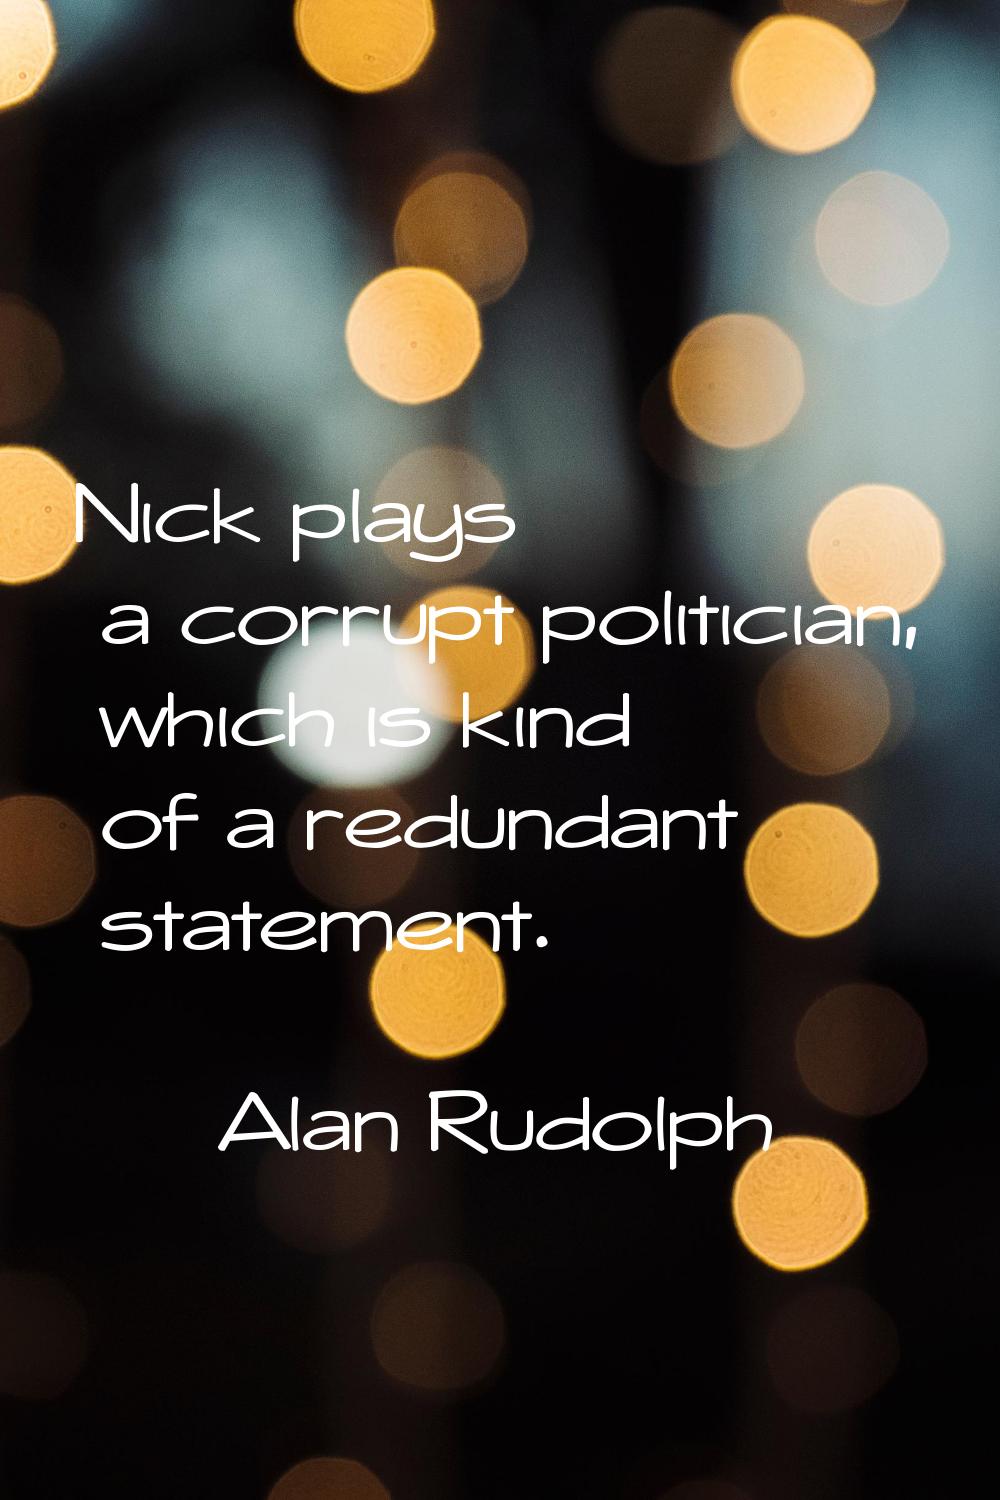 Nick plays a corrupt politician, which is kind of a redundant statement.